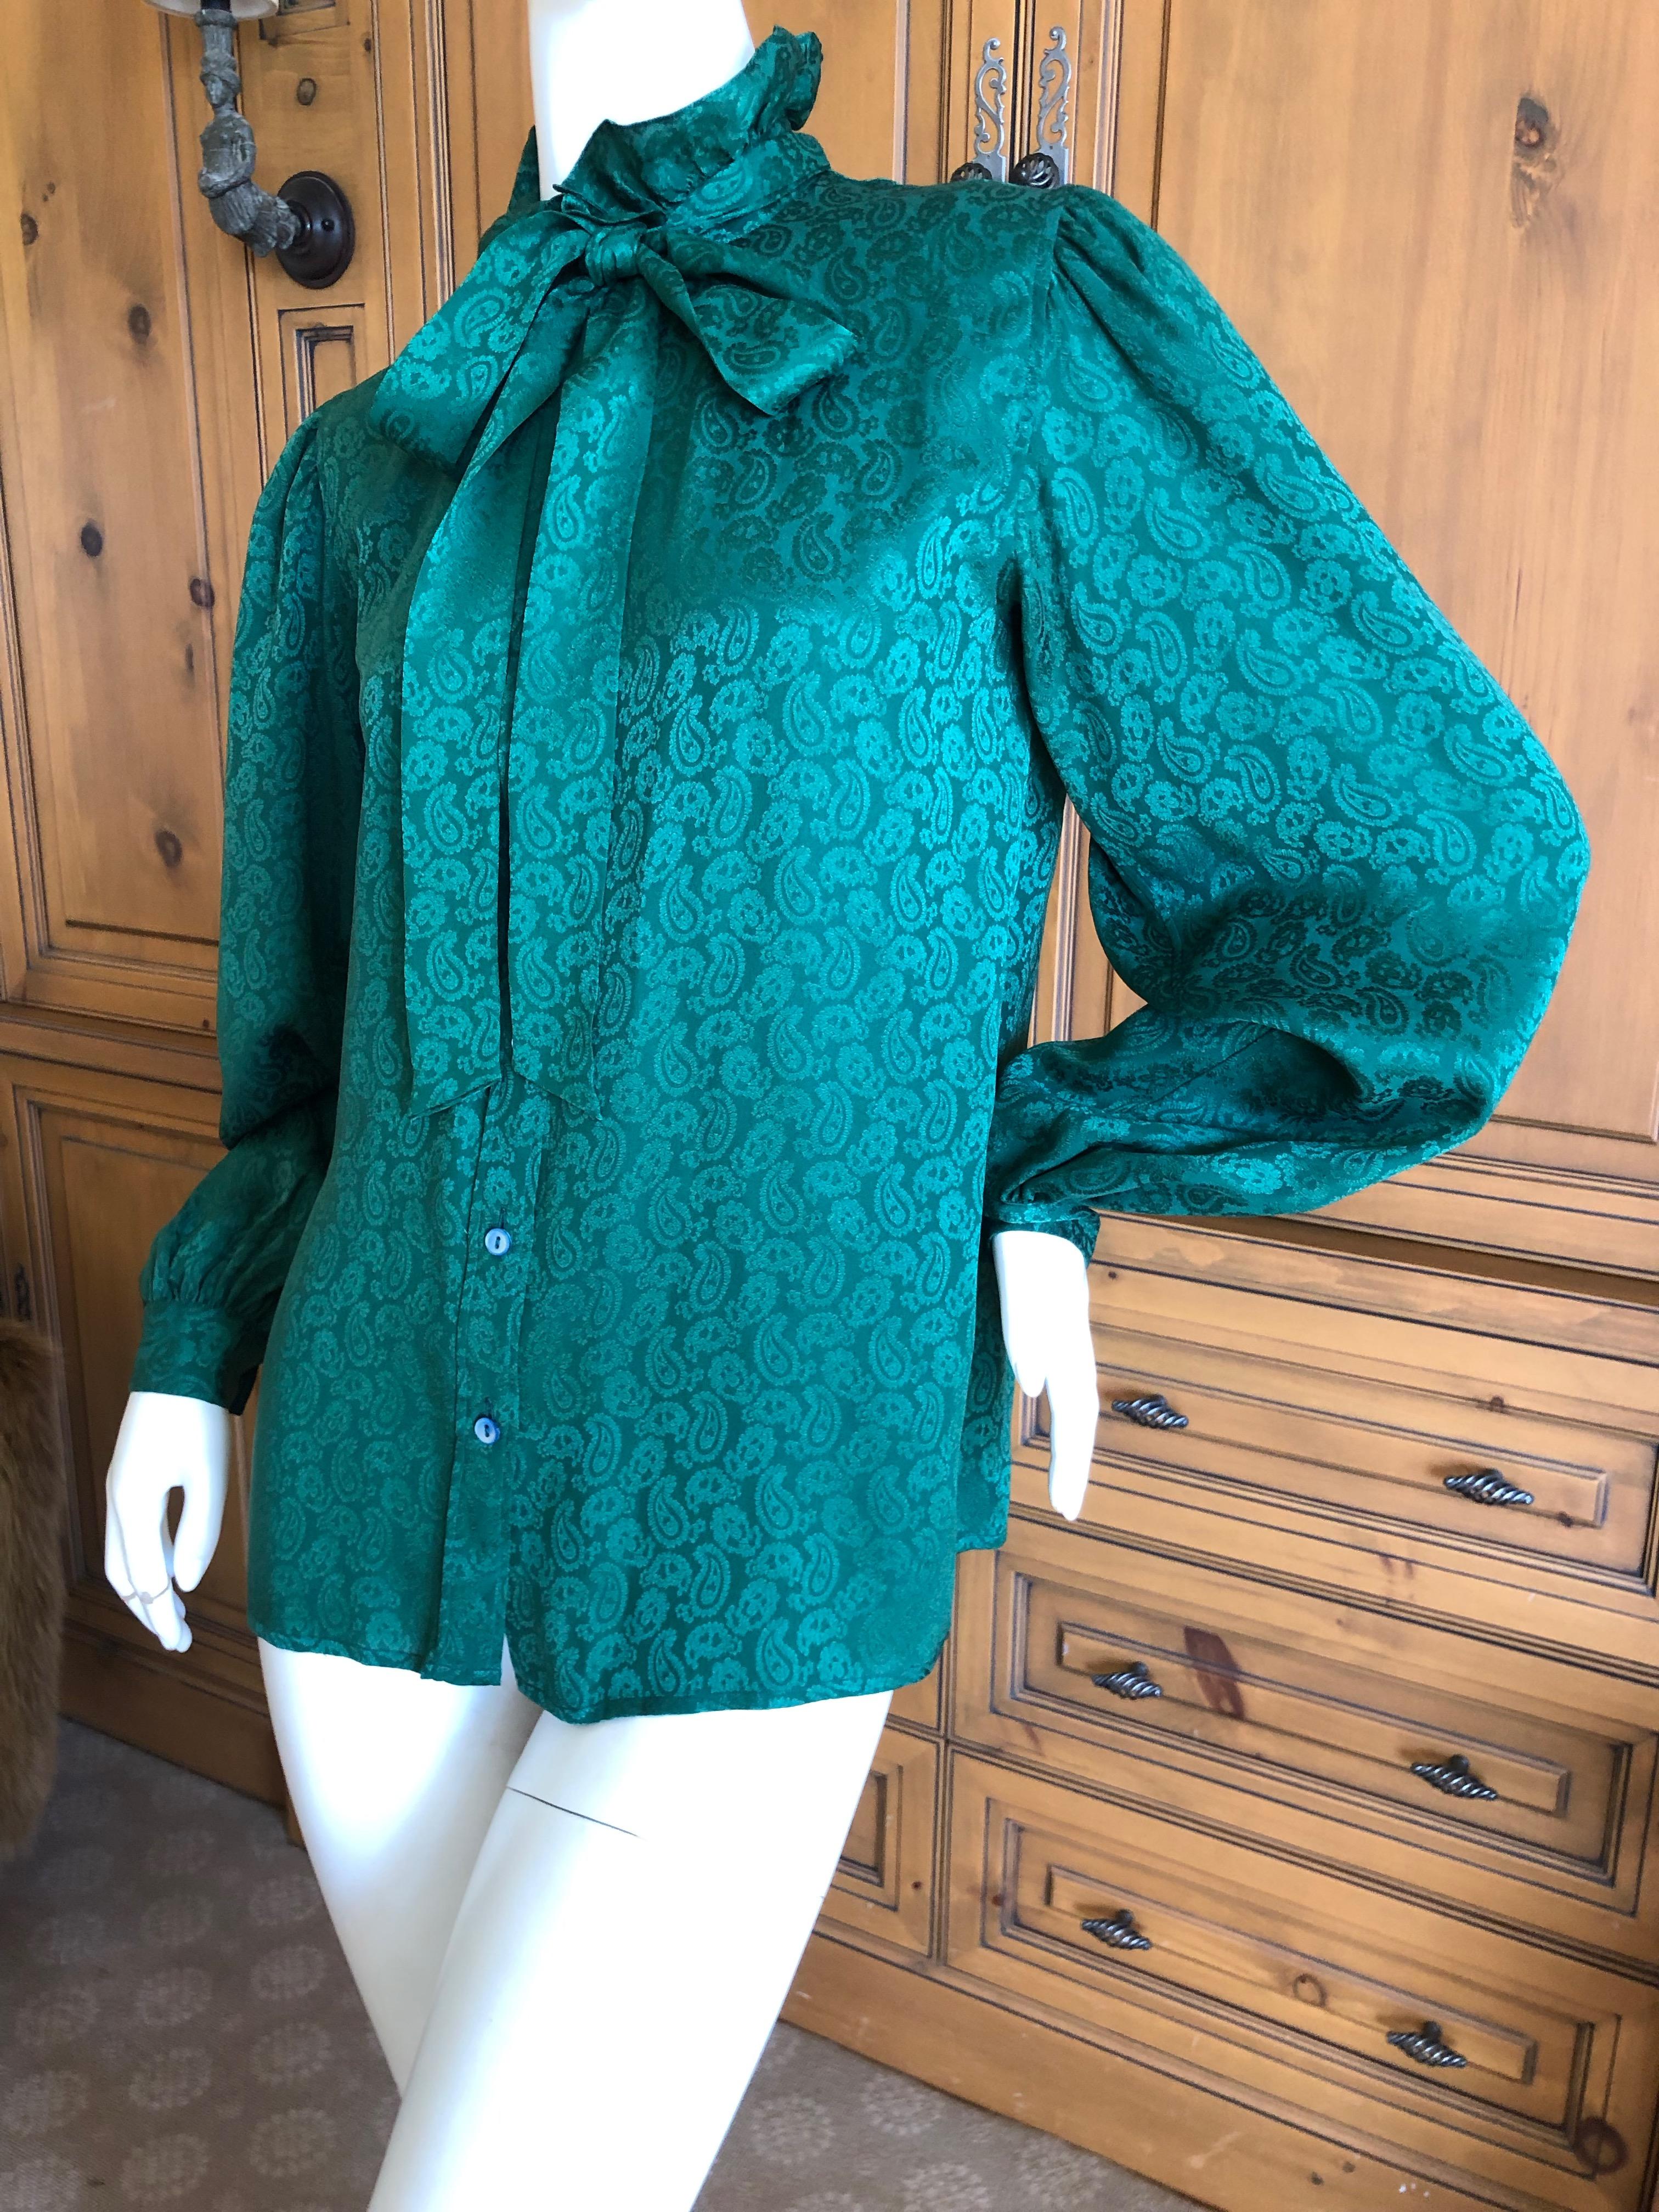 Yves Saint Laurent 70's Rive Gauche Green Silk Paisley Blouse with Pussy Bow In Excellent Condition For Sale In Cloverdale, CA